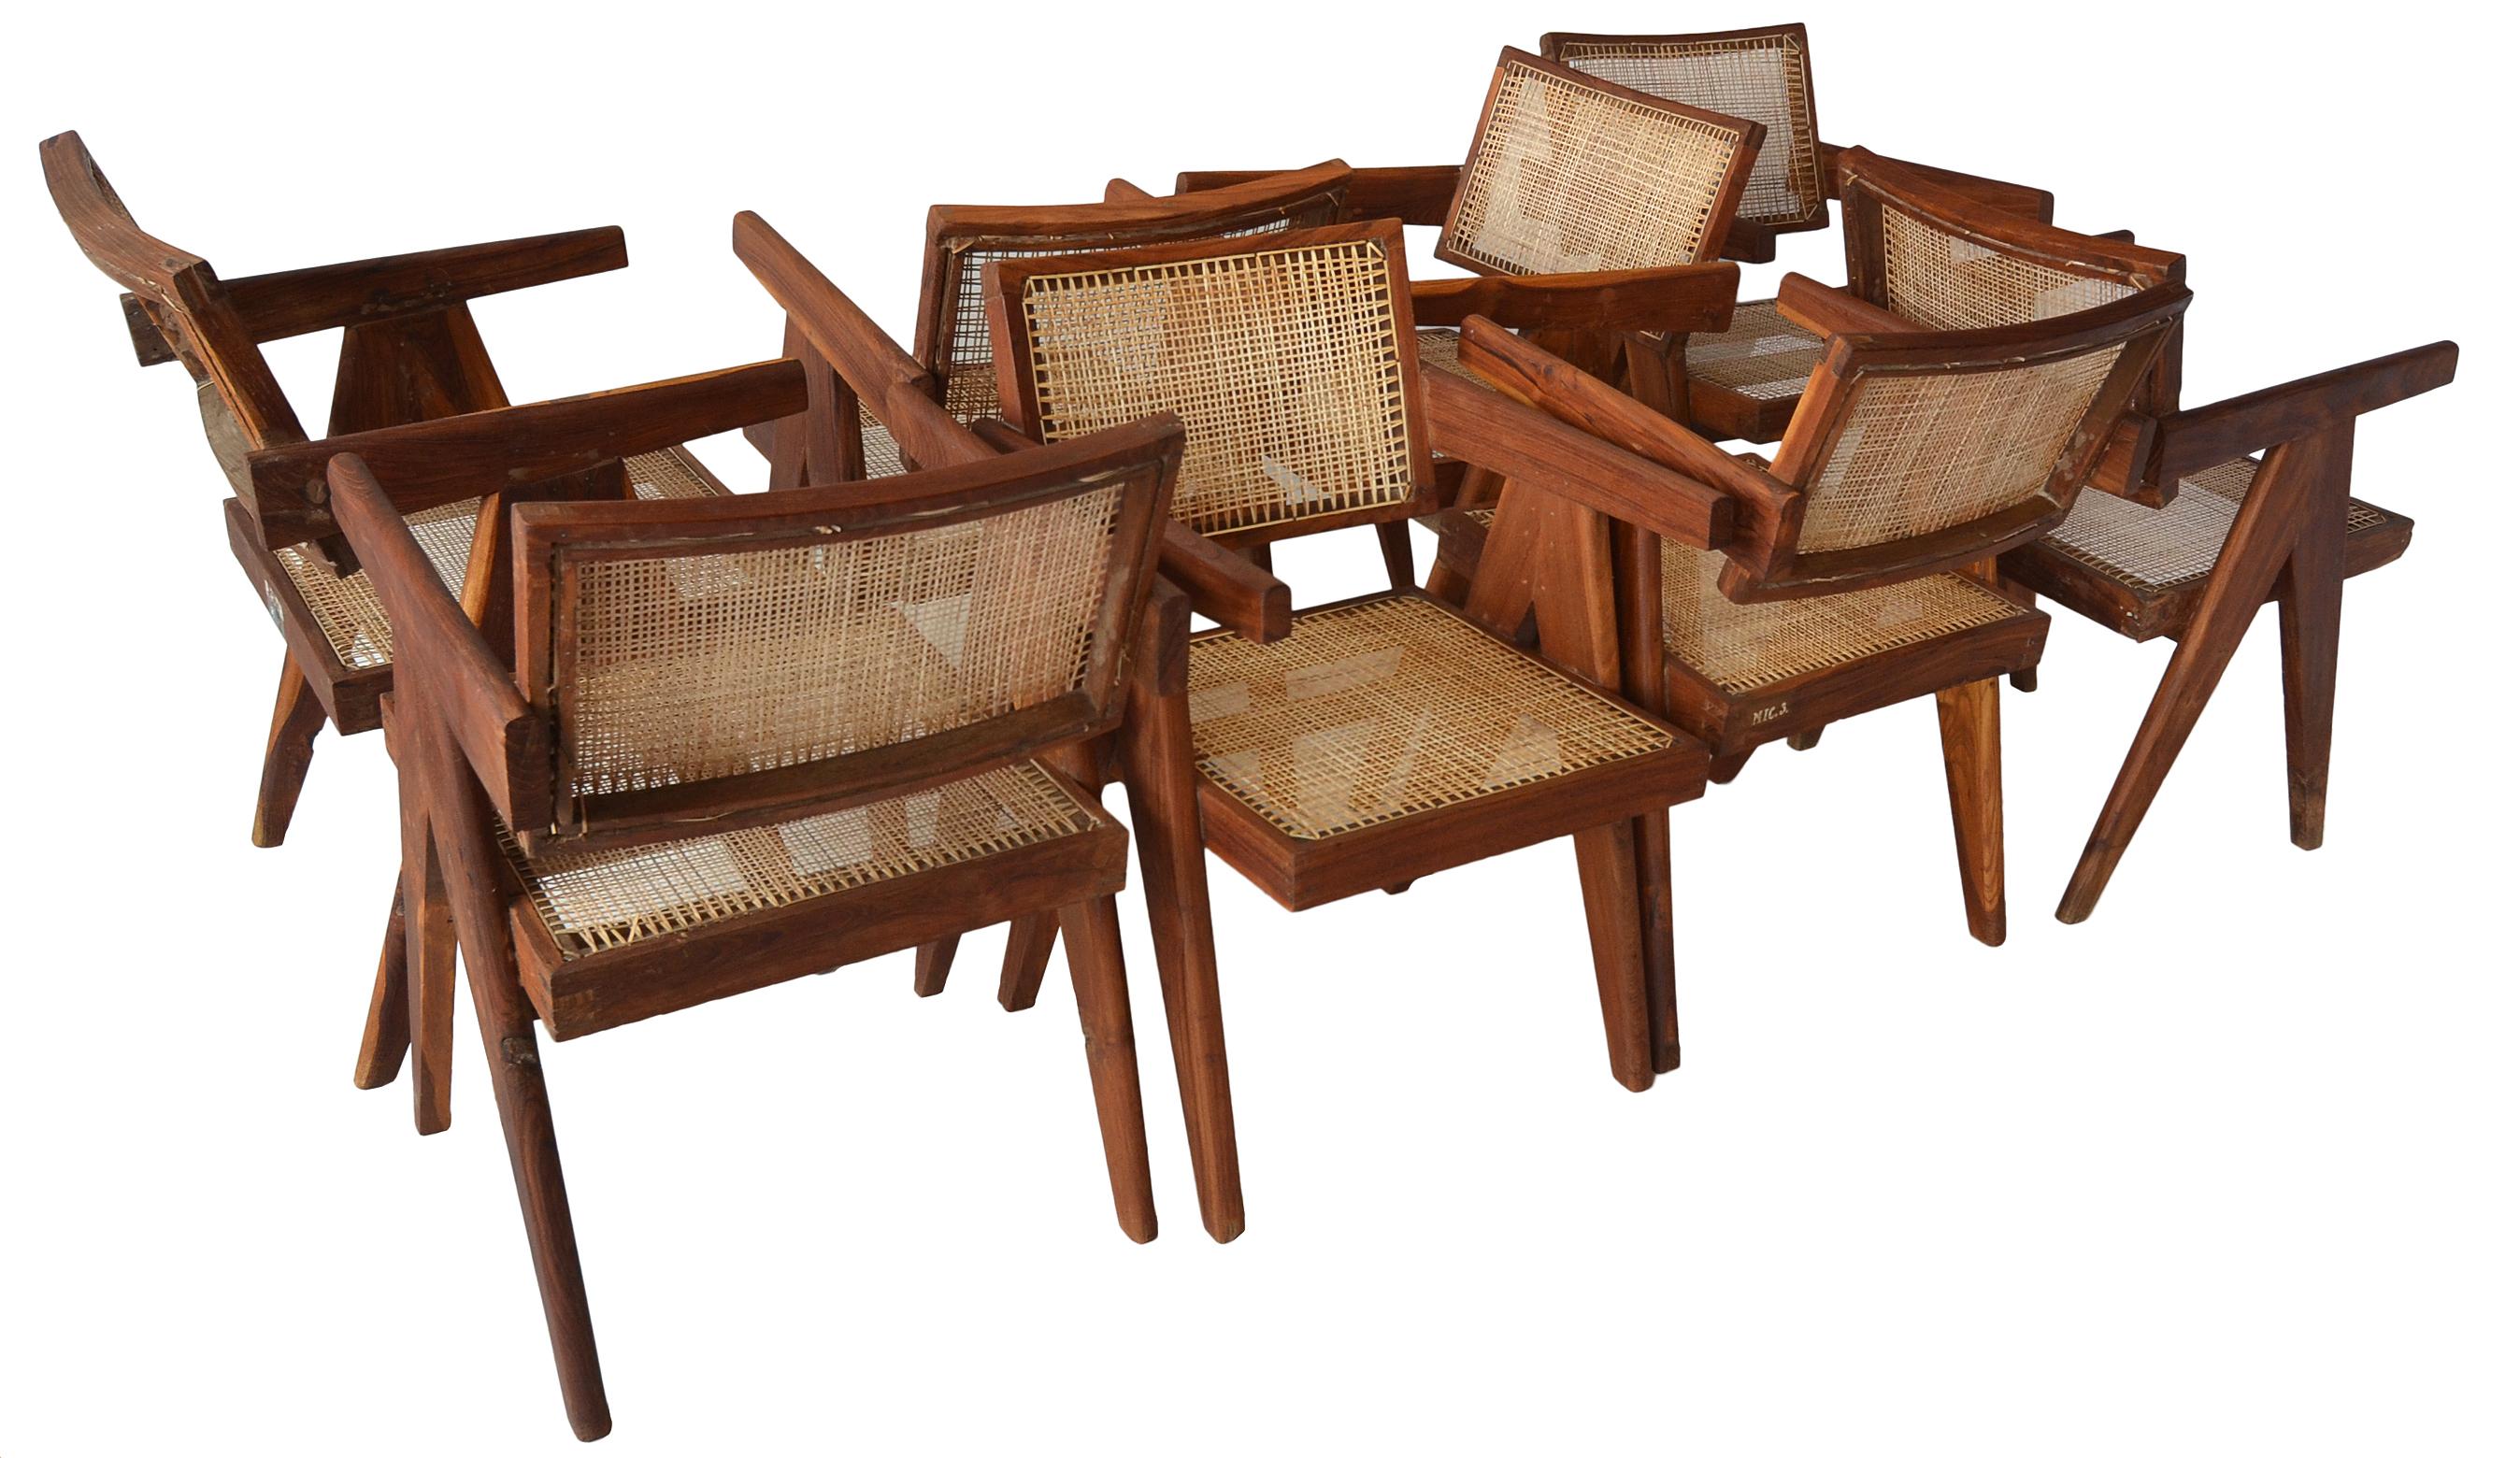 A terrific matching set of 8 floating back armchairs by Pierre Jeanneret for the Chandigarh Project.

These examples are rather desirable as they are executed in Indian rosewood or Sissoo wood. 

Many have remnants of existing stencilling